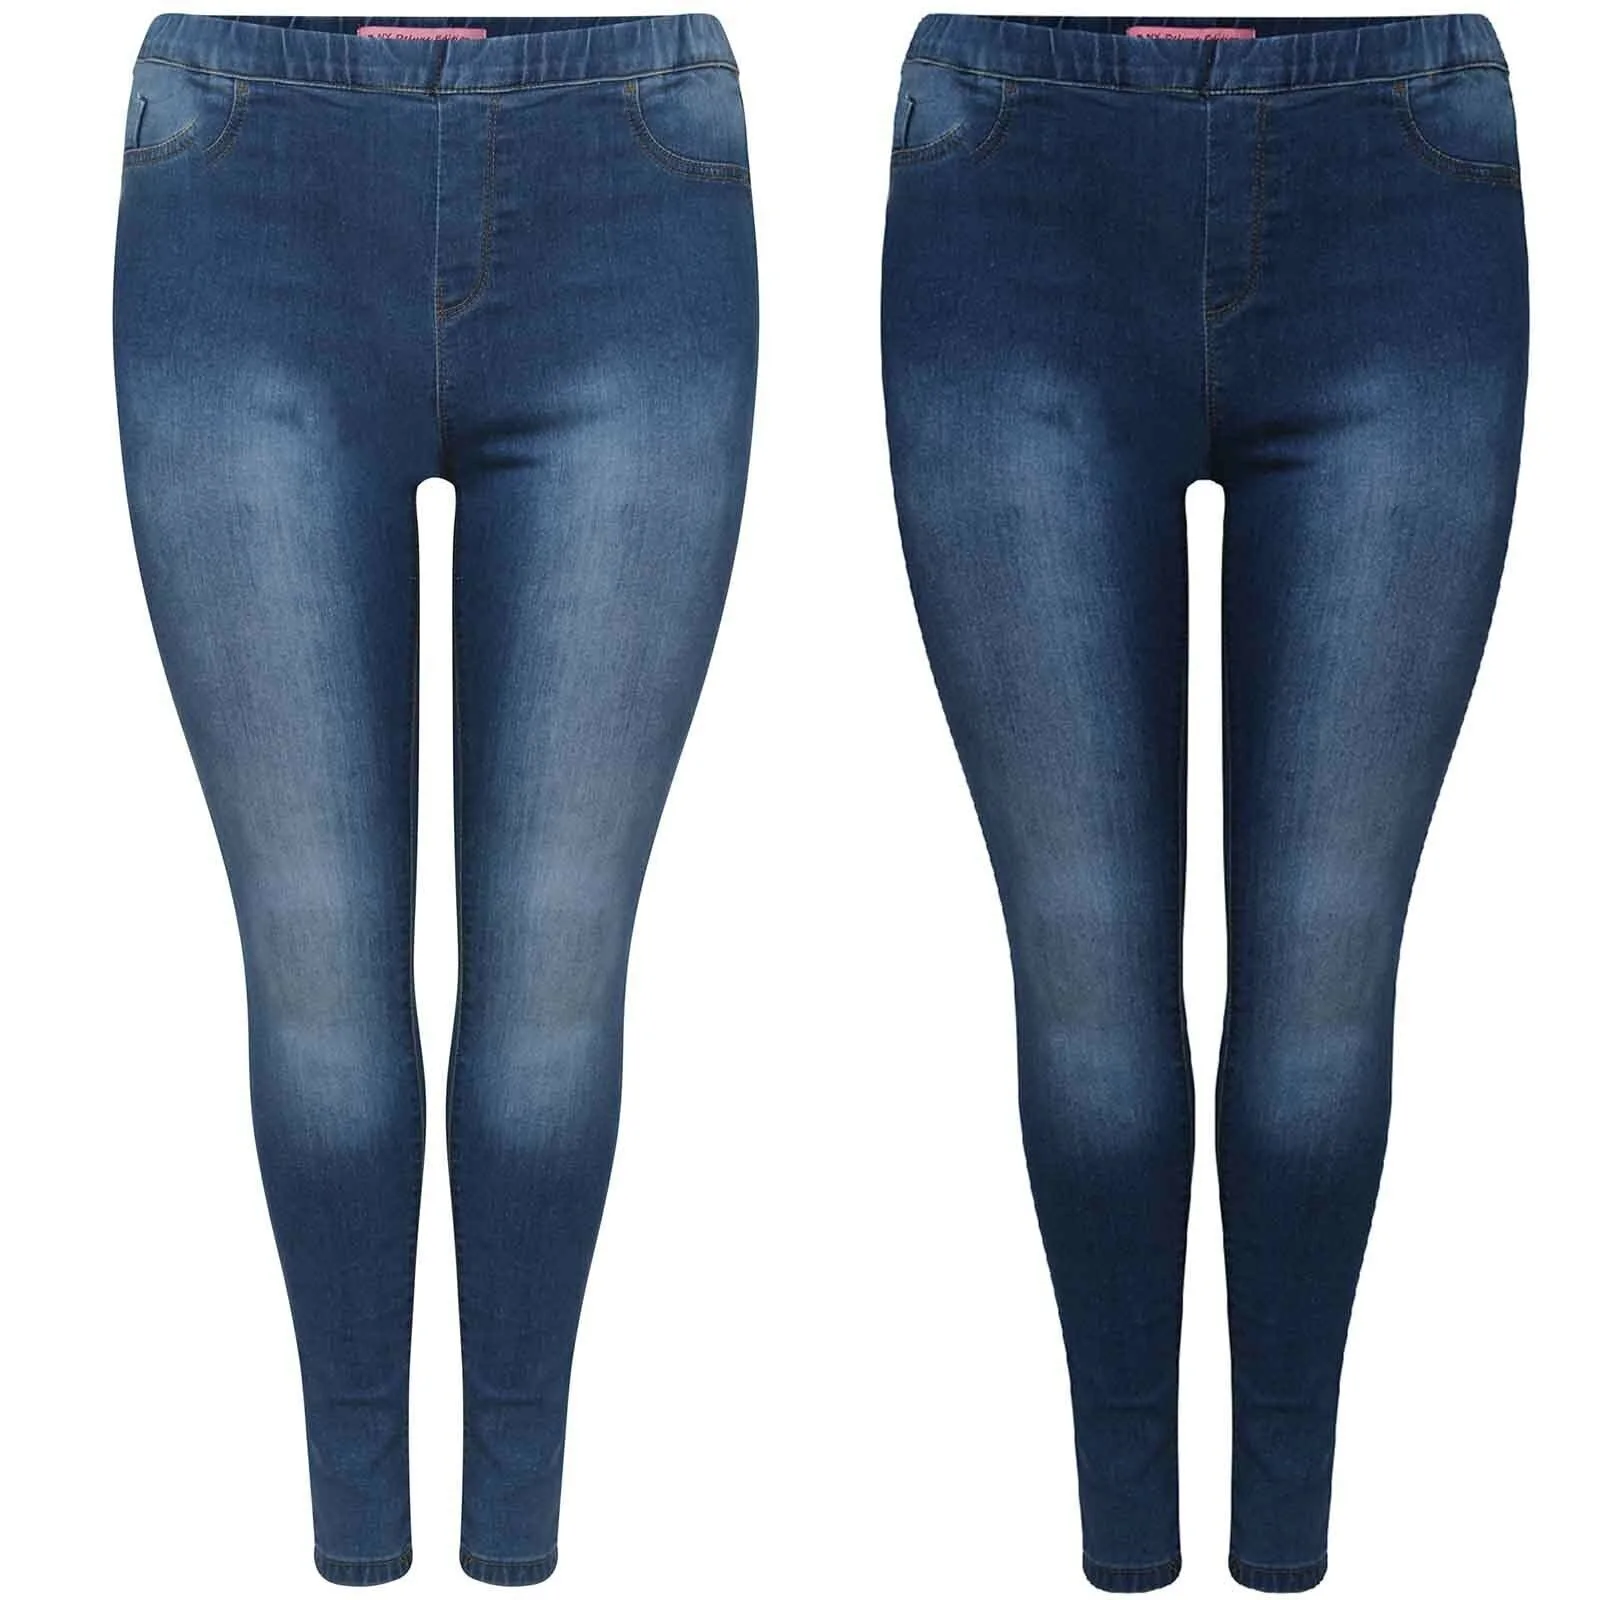 

WOMENS HIGH WAISTED STRETCHY SKINNY JEANS LADIES DENIM JEGGINGS PANTS PLUS SIZE